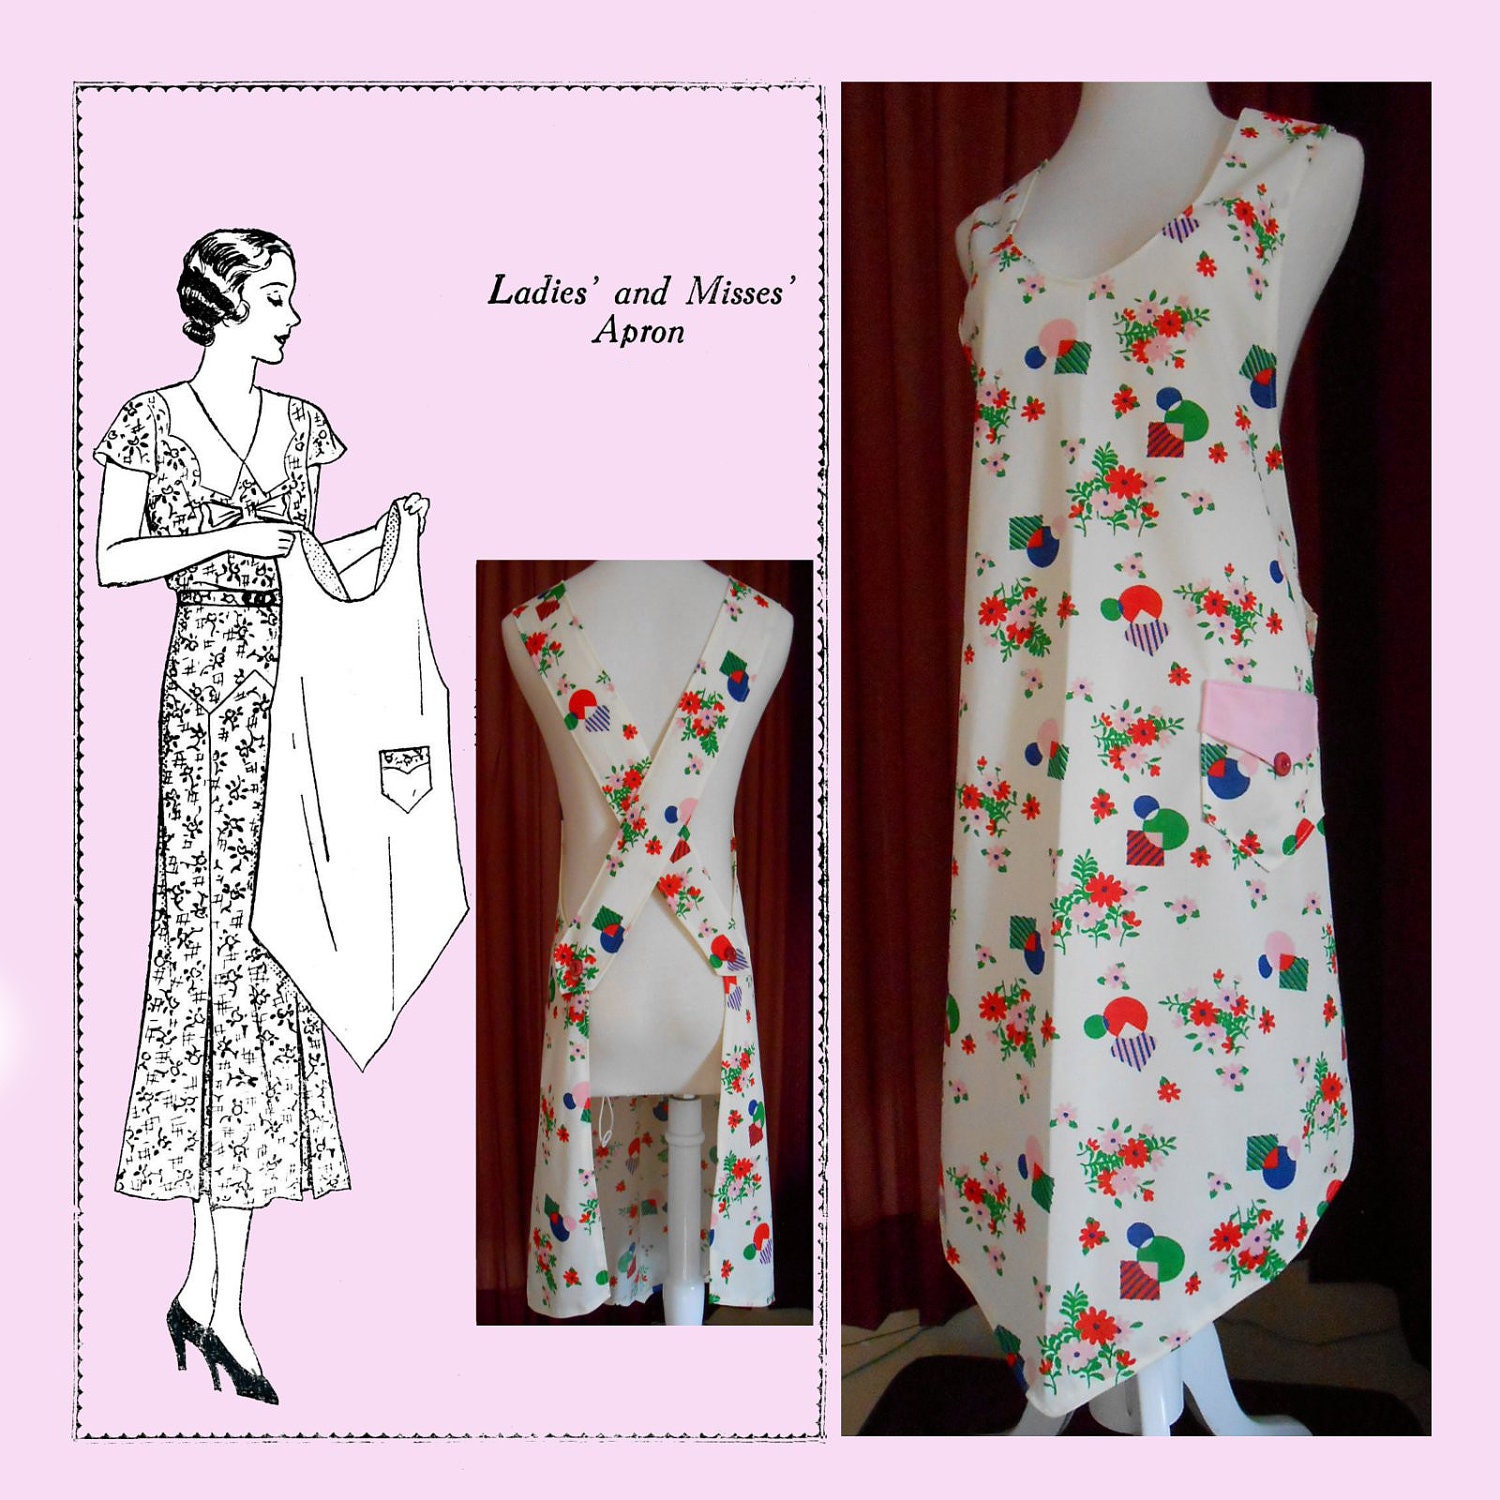 Reproduction Apron Patterns on Etsy